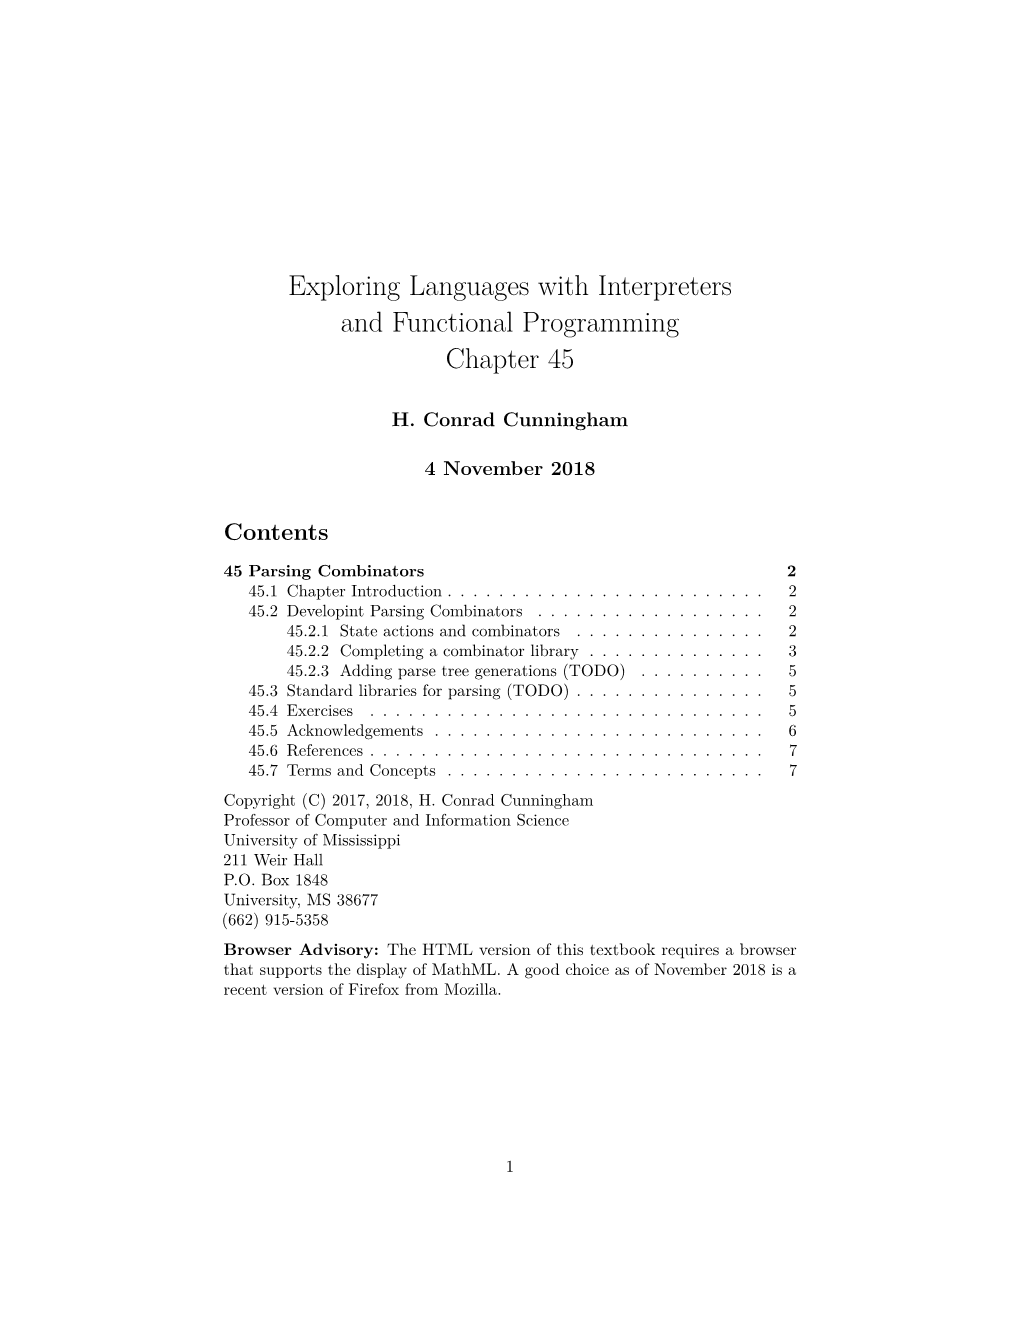 Exploring Languages with Interpreters and Functional Programming Chapter 45